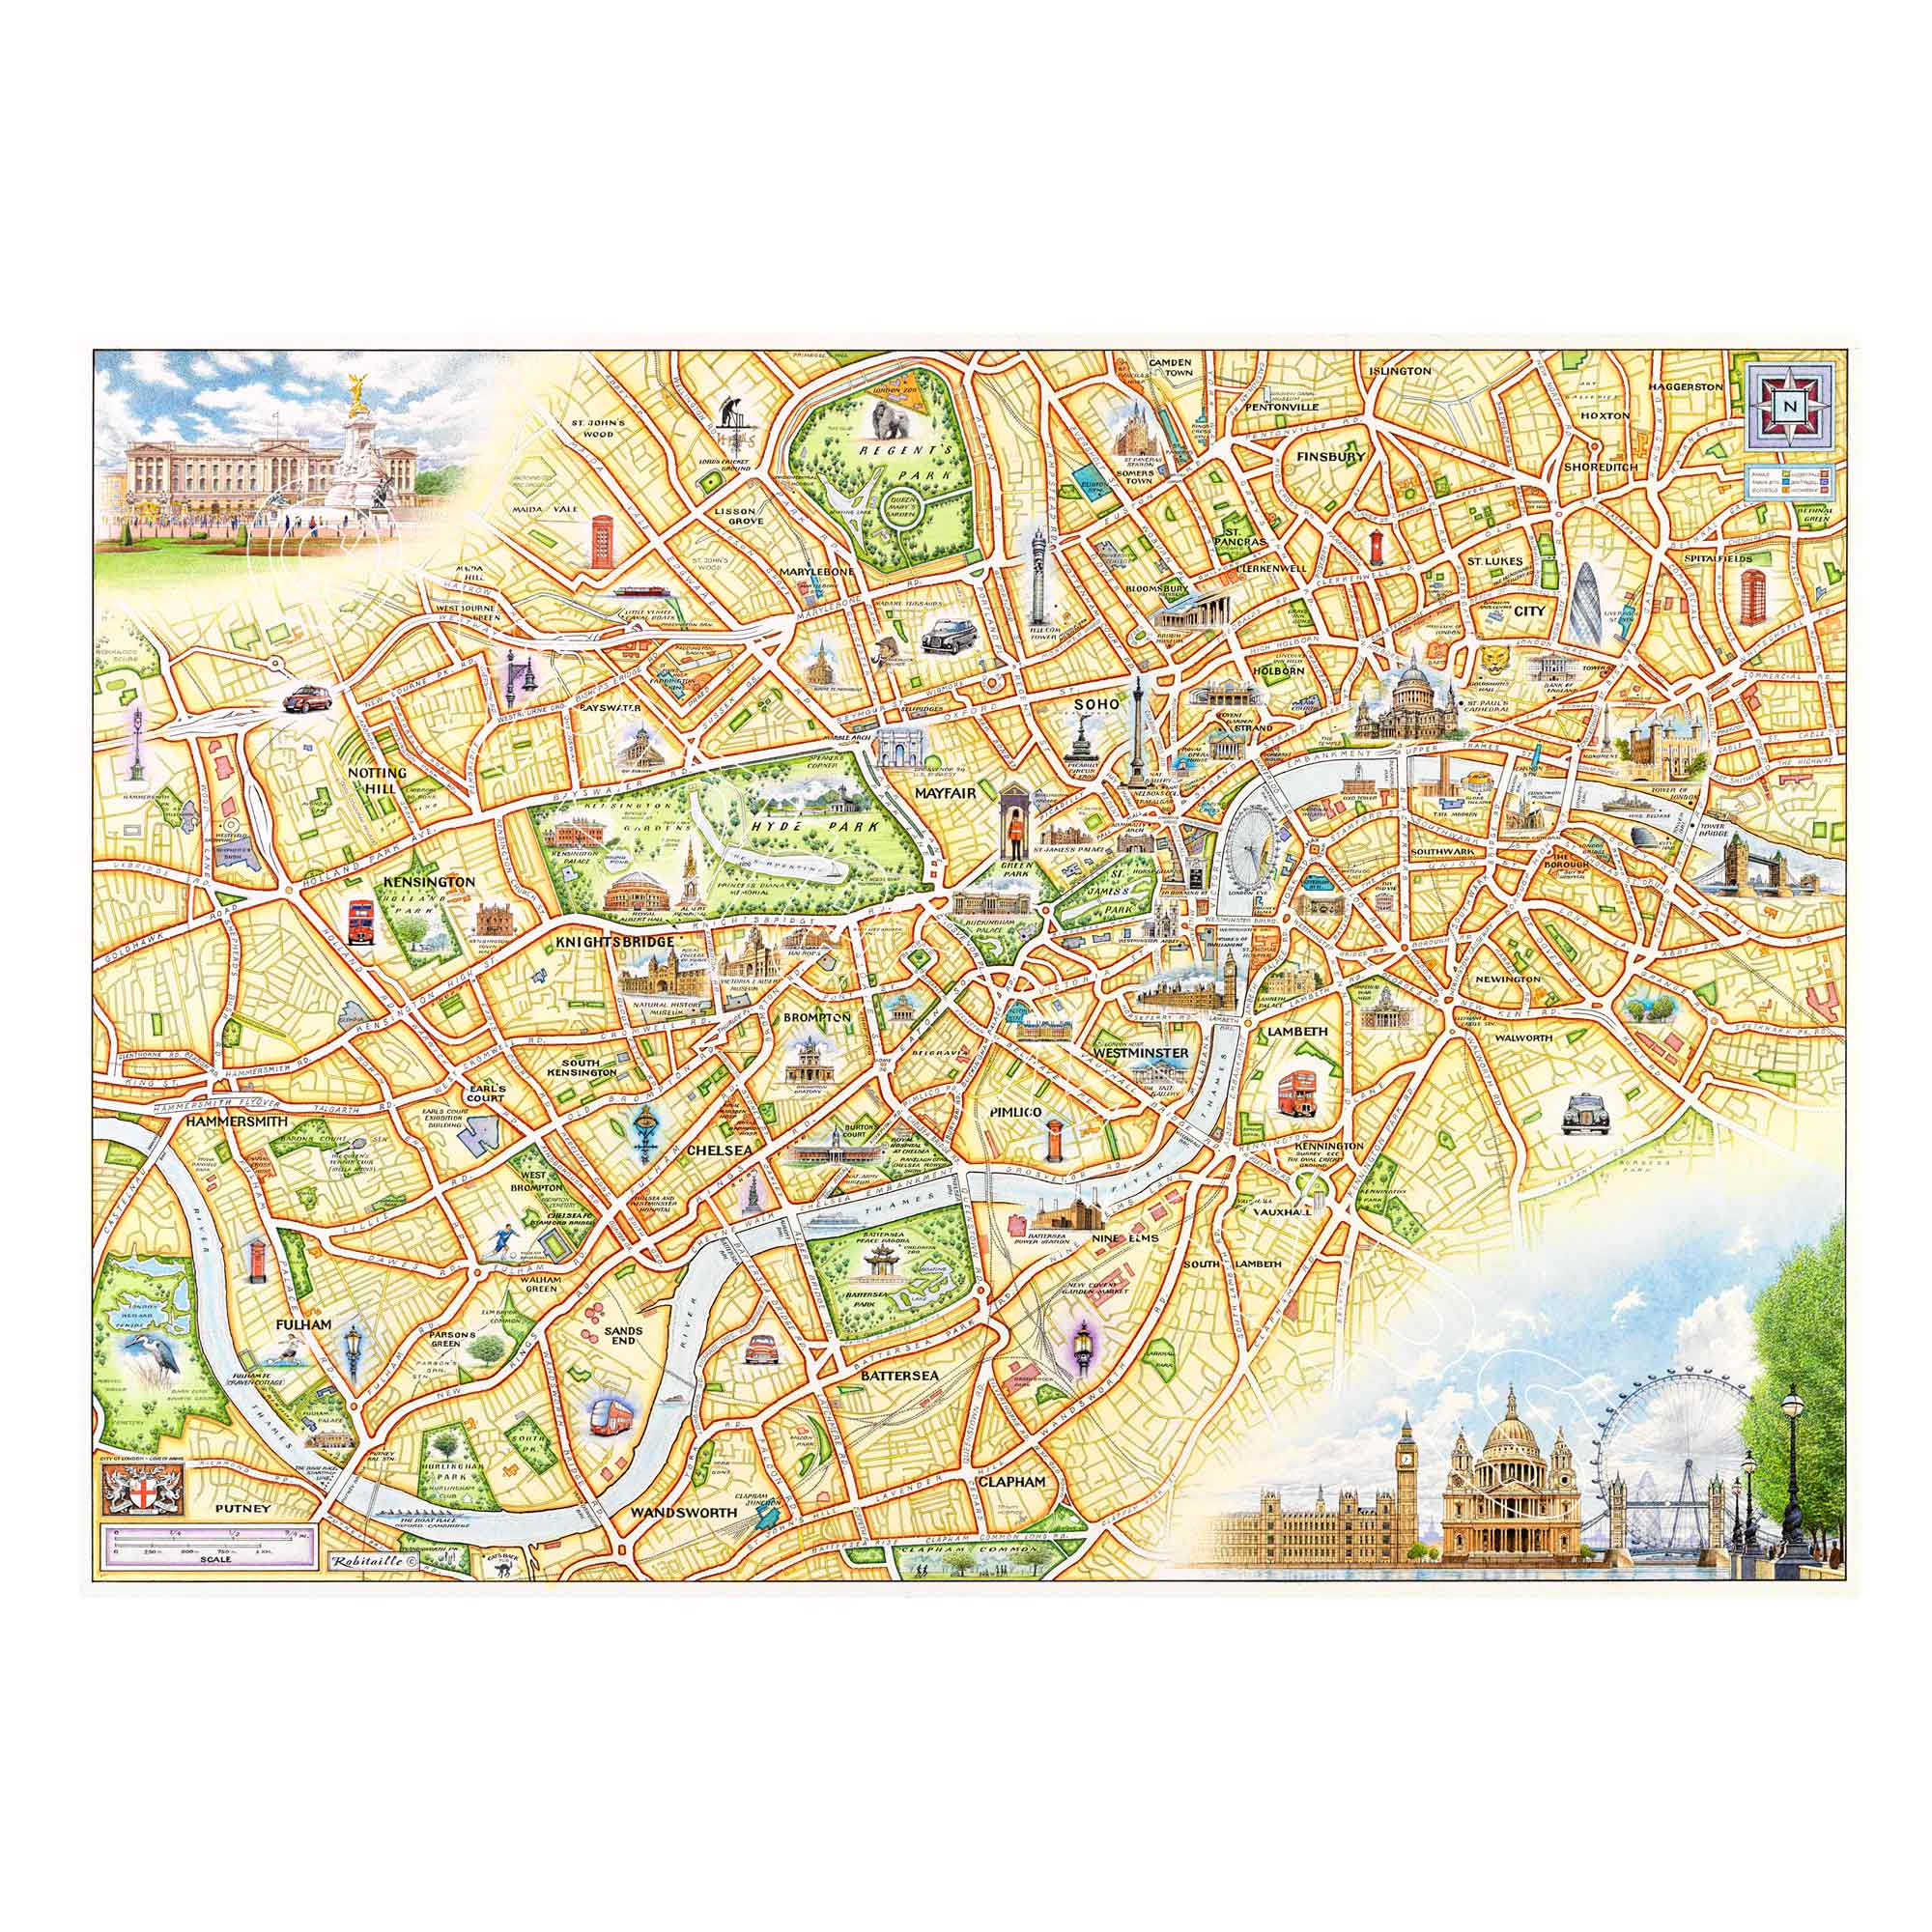 London, England hand-drawn map in earth tones of gold, brown, and orange. The map features the intricate city layout of London, England. Featured illustrations include a double-decker red bus, Kensington, Buckingham Palace, and Regent's Park. Measures 24x18.